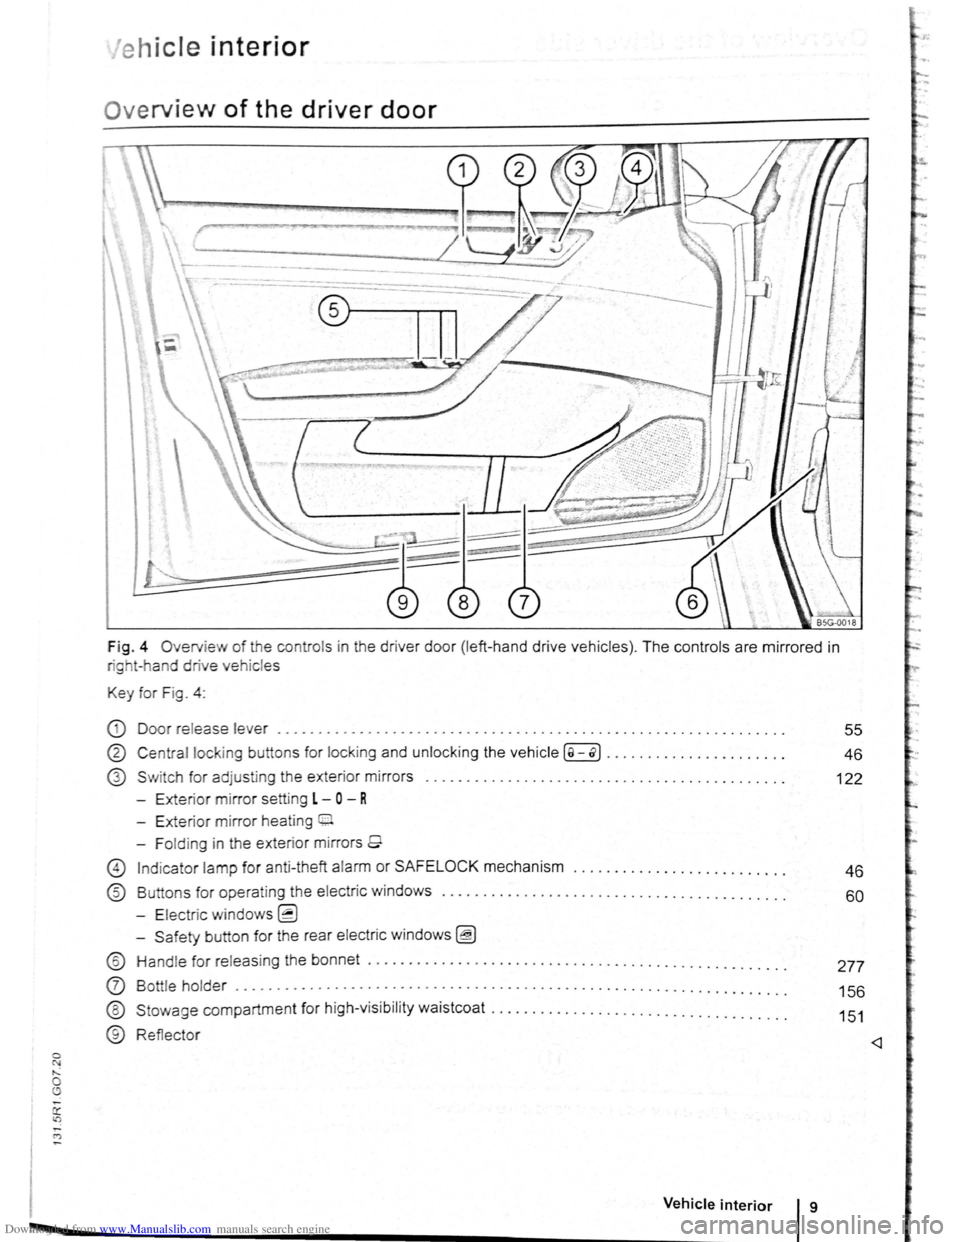 VOLKSWAGEN BEETLE 2011  Owner´s Manual Downloaded from www.Manualslib.com manuals search engine 0 N ,..; 0 
e h ic le interior 
Ov erview of the driver door 
Fig . 4 Overv ie w of the  contro ls  in  the drive r doo r (left -ha nd  dr ive